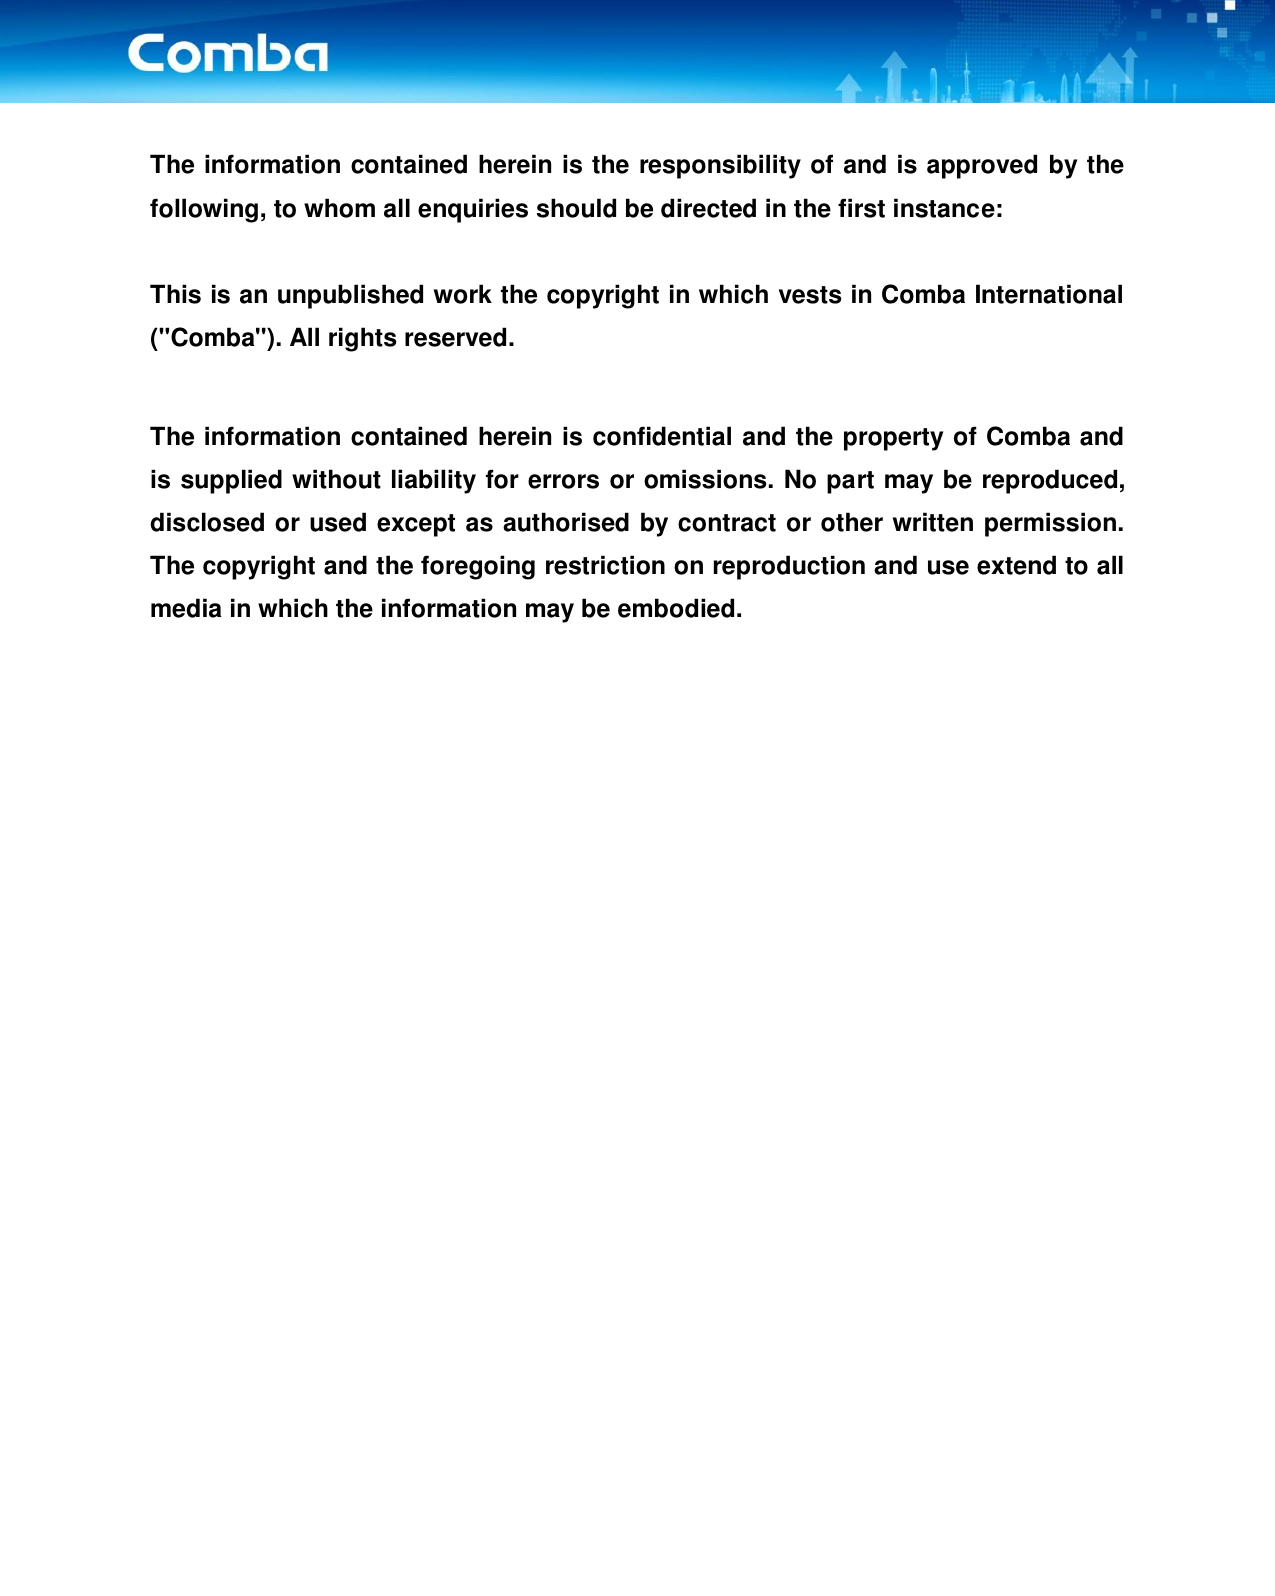    The information contained herein is the responsibility of and is approved by the following, to whom all enquiries should be directed in the first instance:  This is an unpublished work the copyright in which vests in Comba International (&quot;Comba&quot;). All rights reserved.  The information contained herein is confidential and the property of Comba and is supplied without liability for errors or omissions. No part may be reproduced, disclosed or used except as authorised by contract or other written permission. The copyright and the foregoing restriction on reproduction and use extend to all media in which the information may be embodied.                    